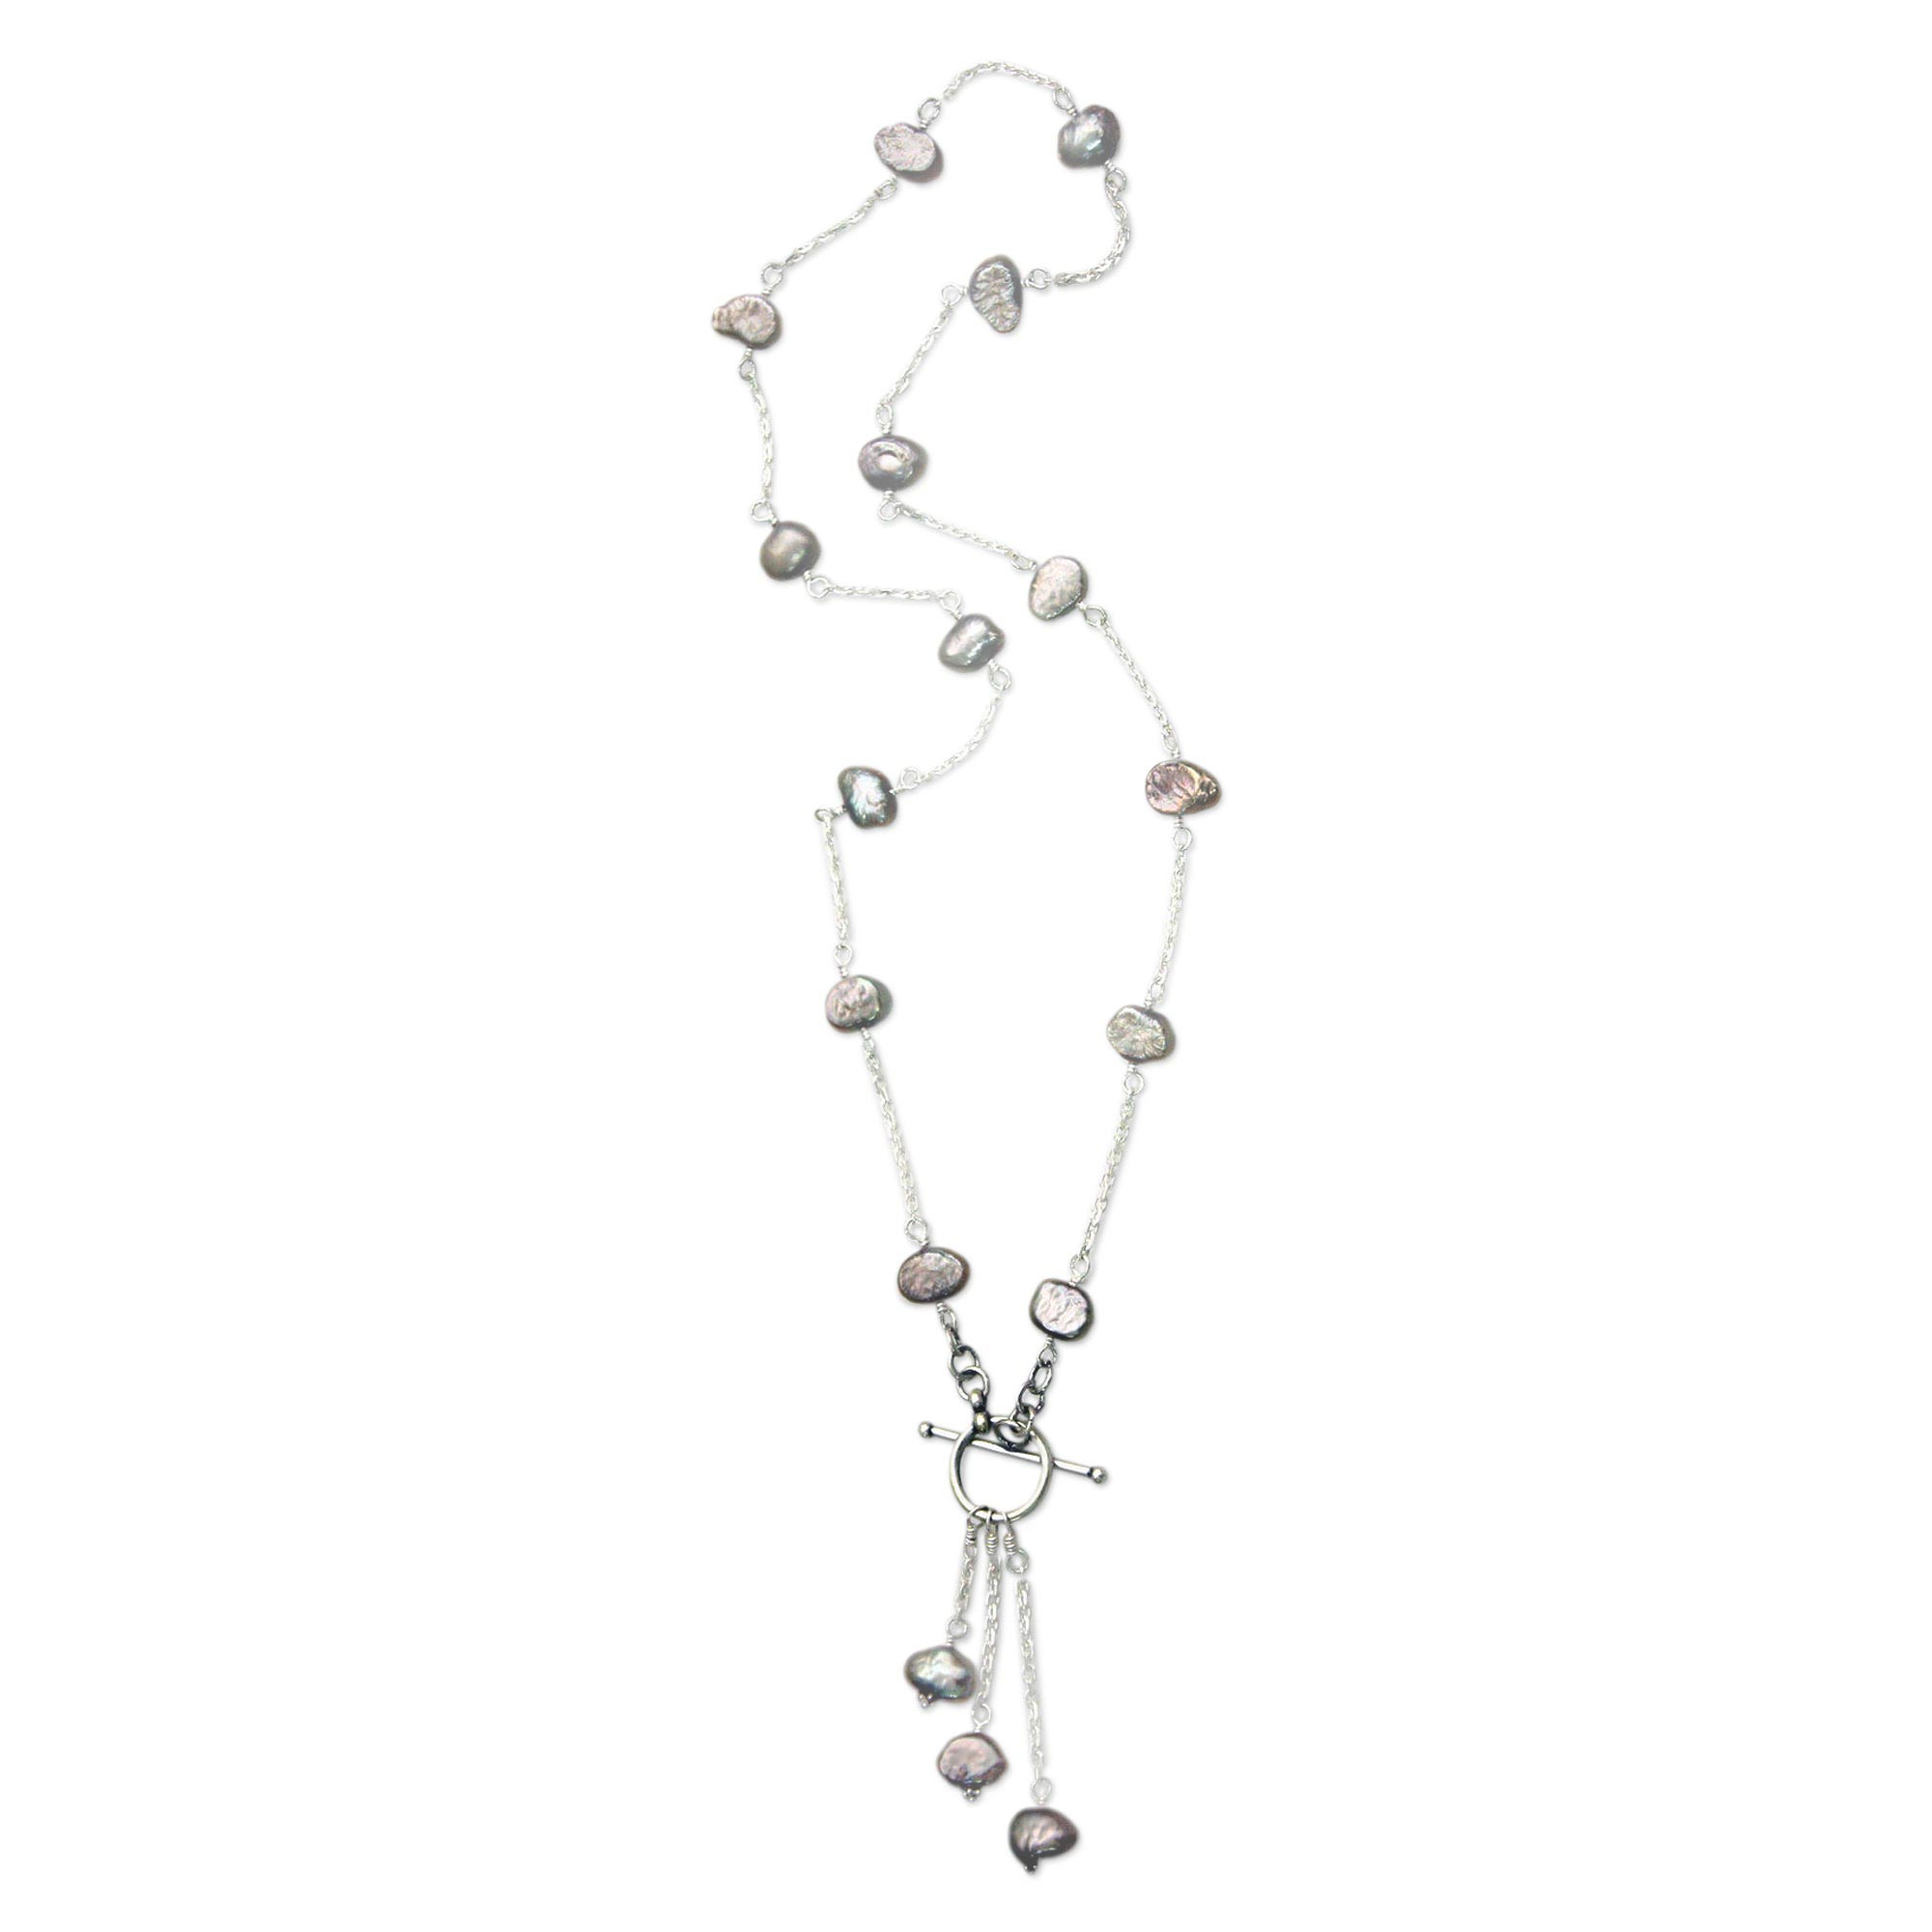 Pearl pendant necklace - Excellence | NOVICA